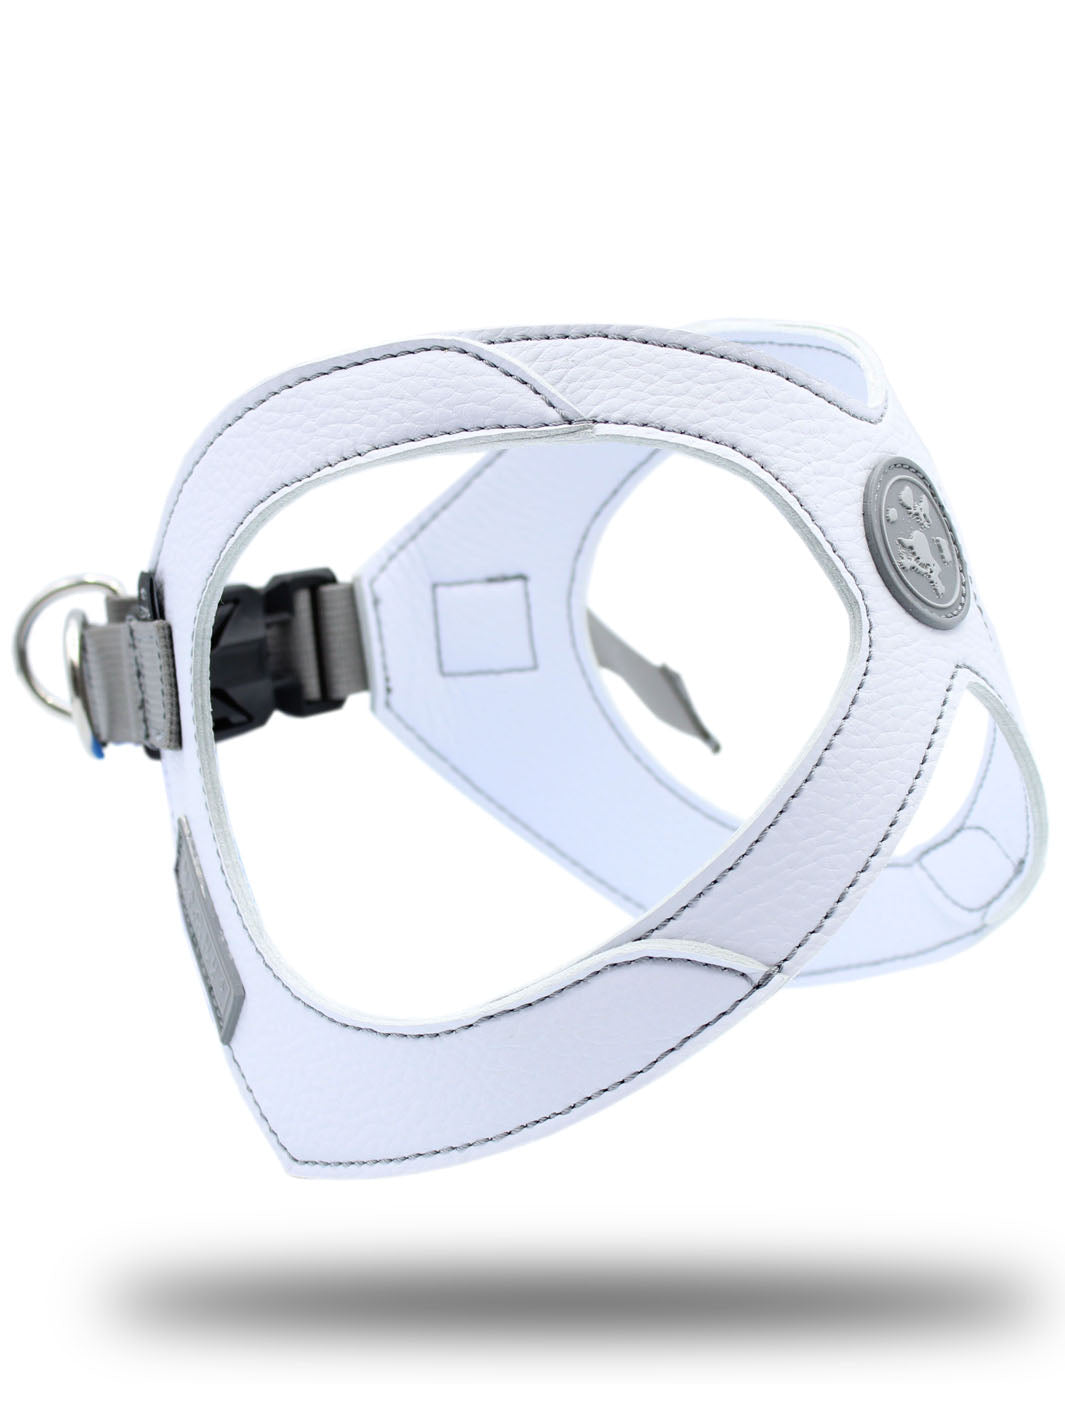 MAGNUS Canis vegan leather frenchie harness in white as seen from a three quarter view.